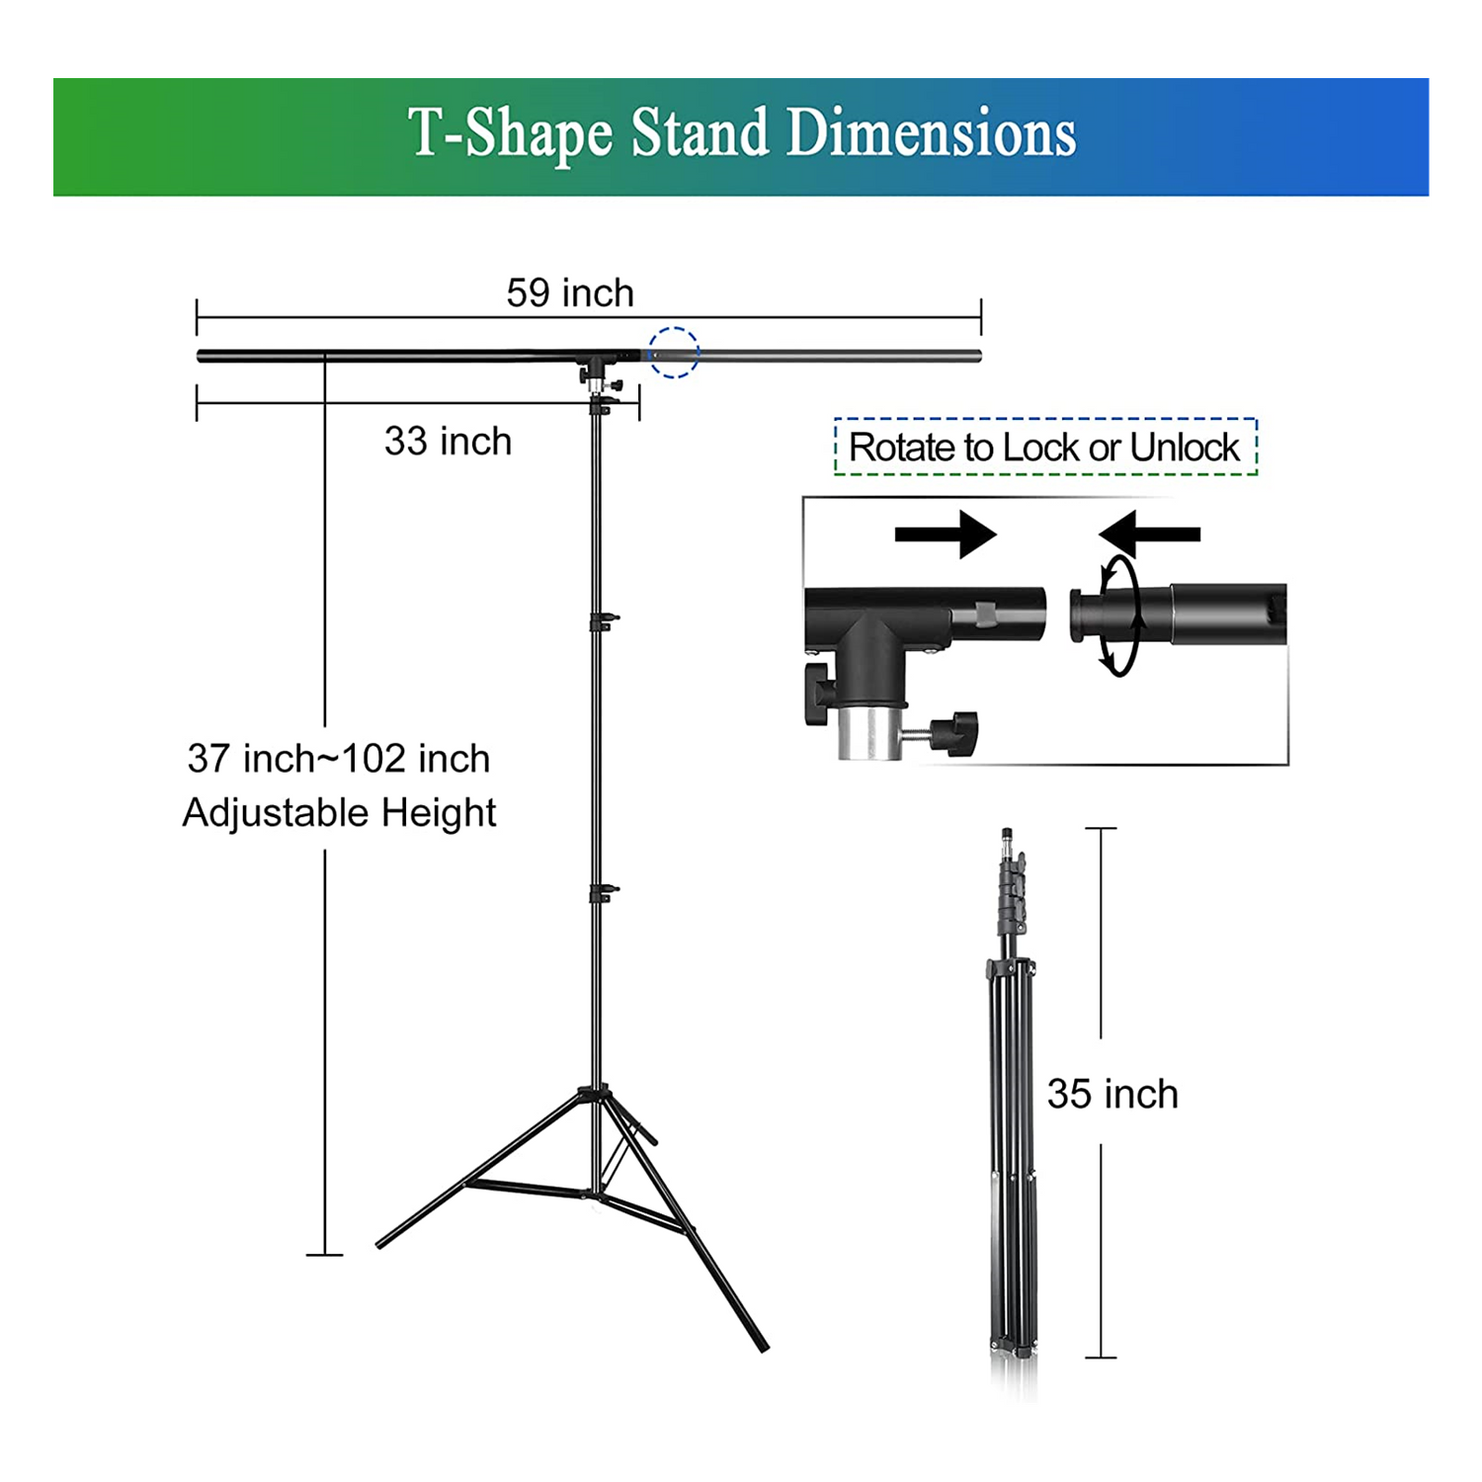 5 X 8.5ft Green and Blue Portable T-Shape Backdrop Stand Kit